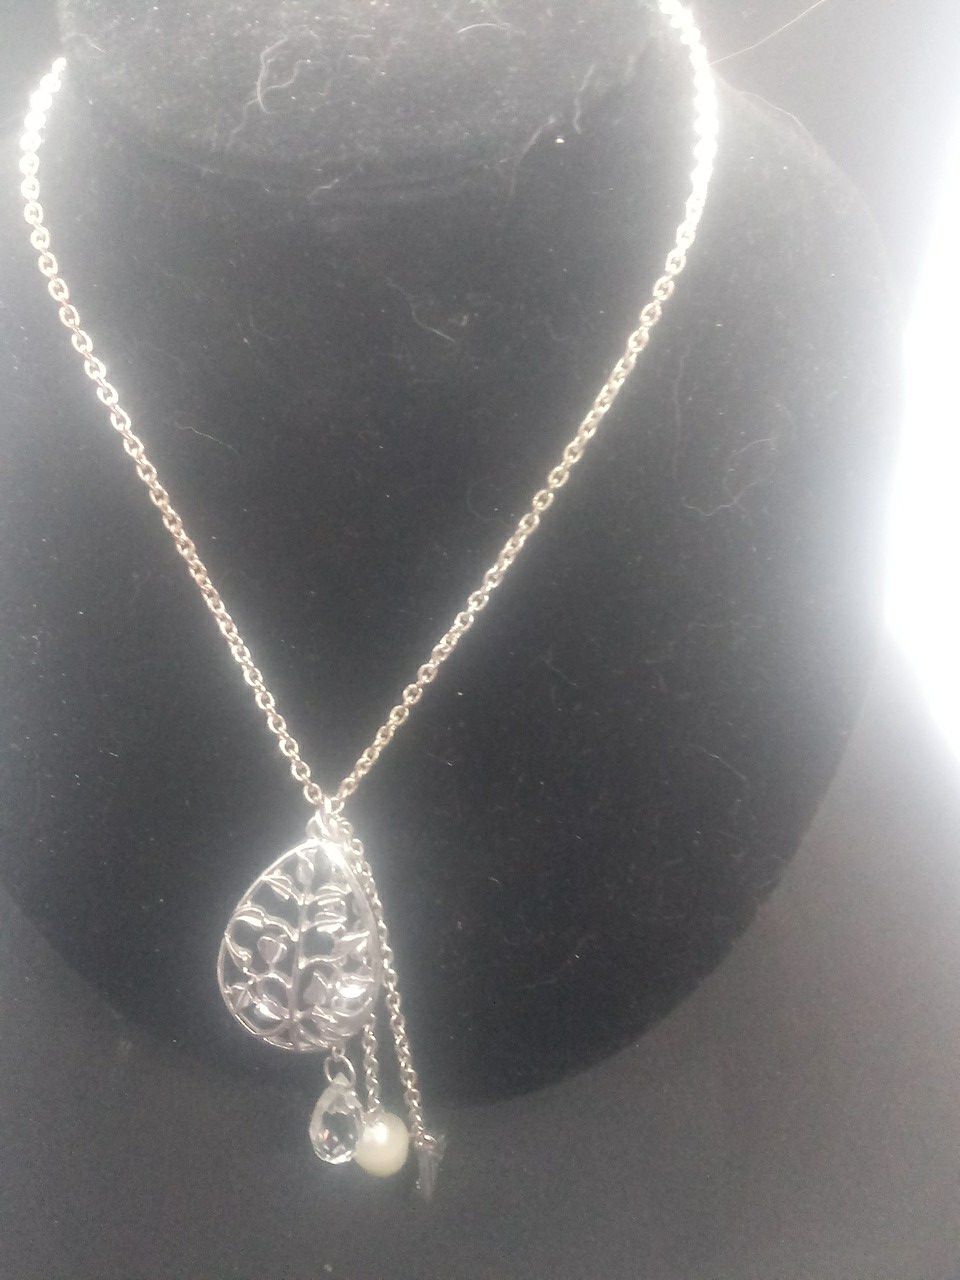 Beautiful casual necklacee/ ivy pendant